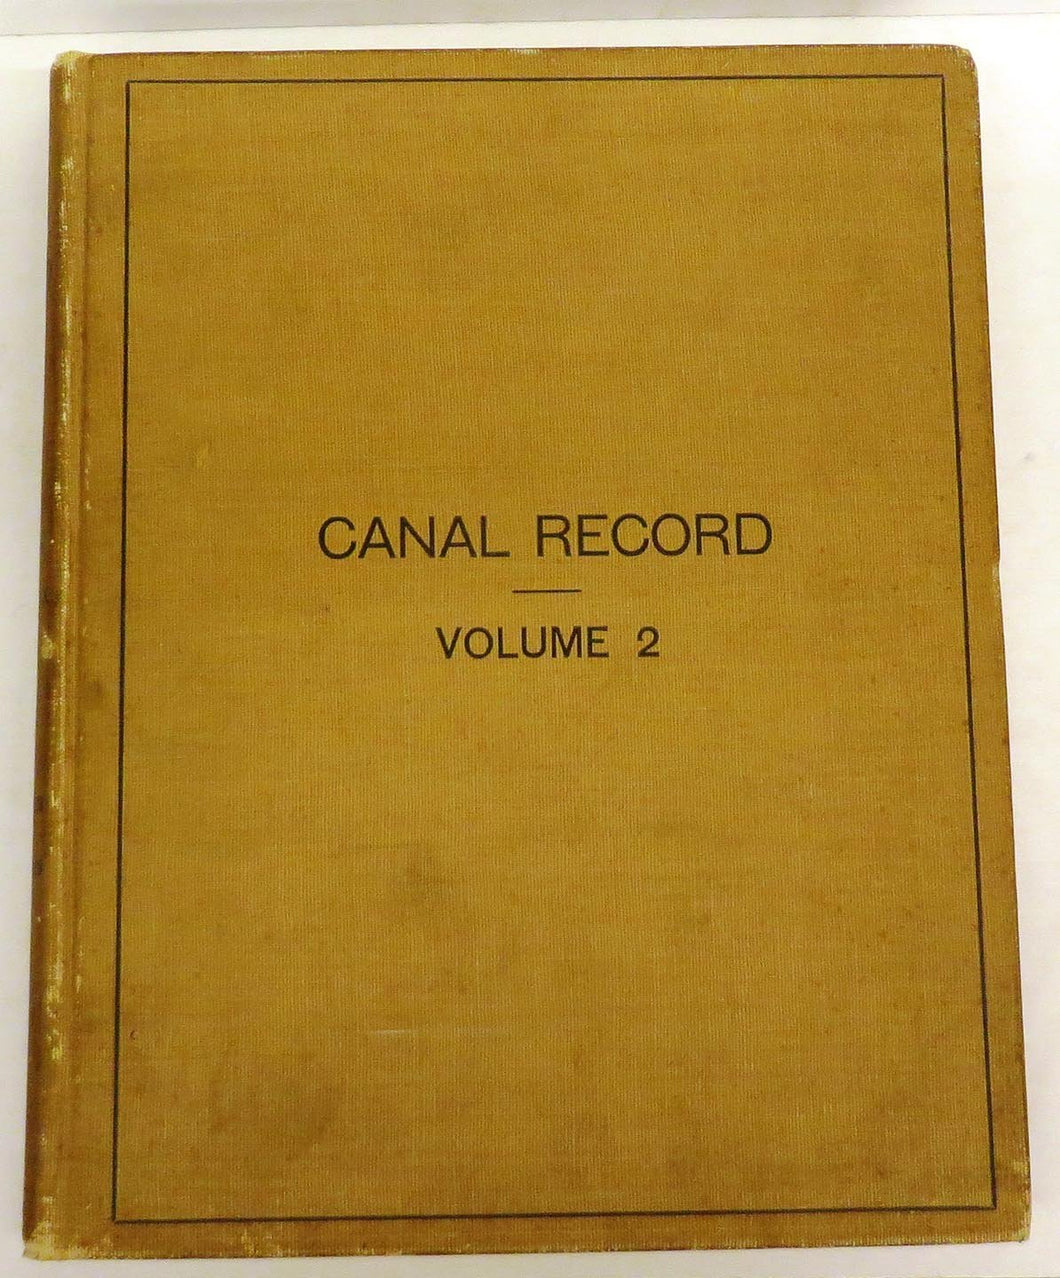 Canal Record September 2, 1908 - August 25, 1909. Volume II. With Index